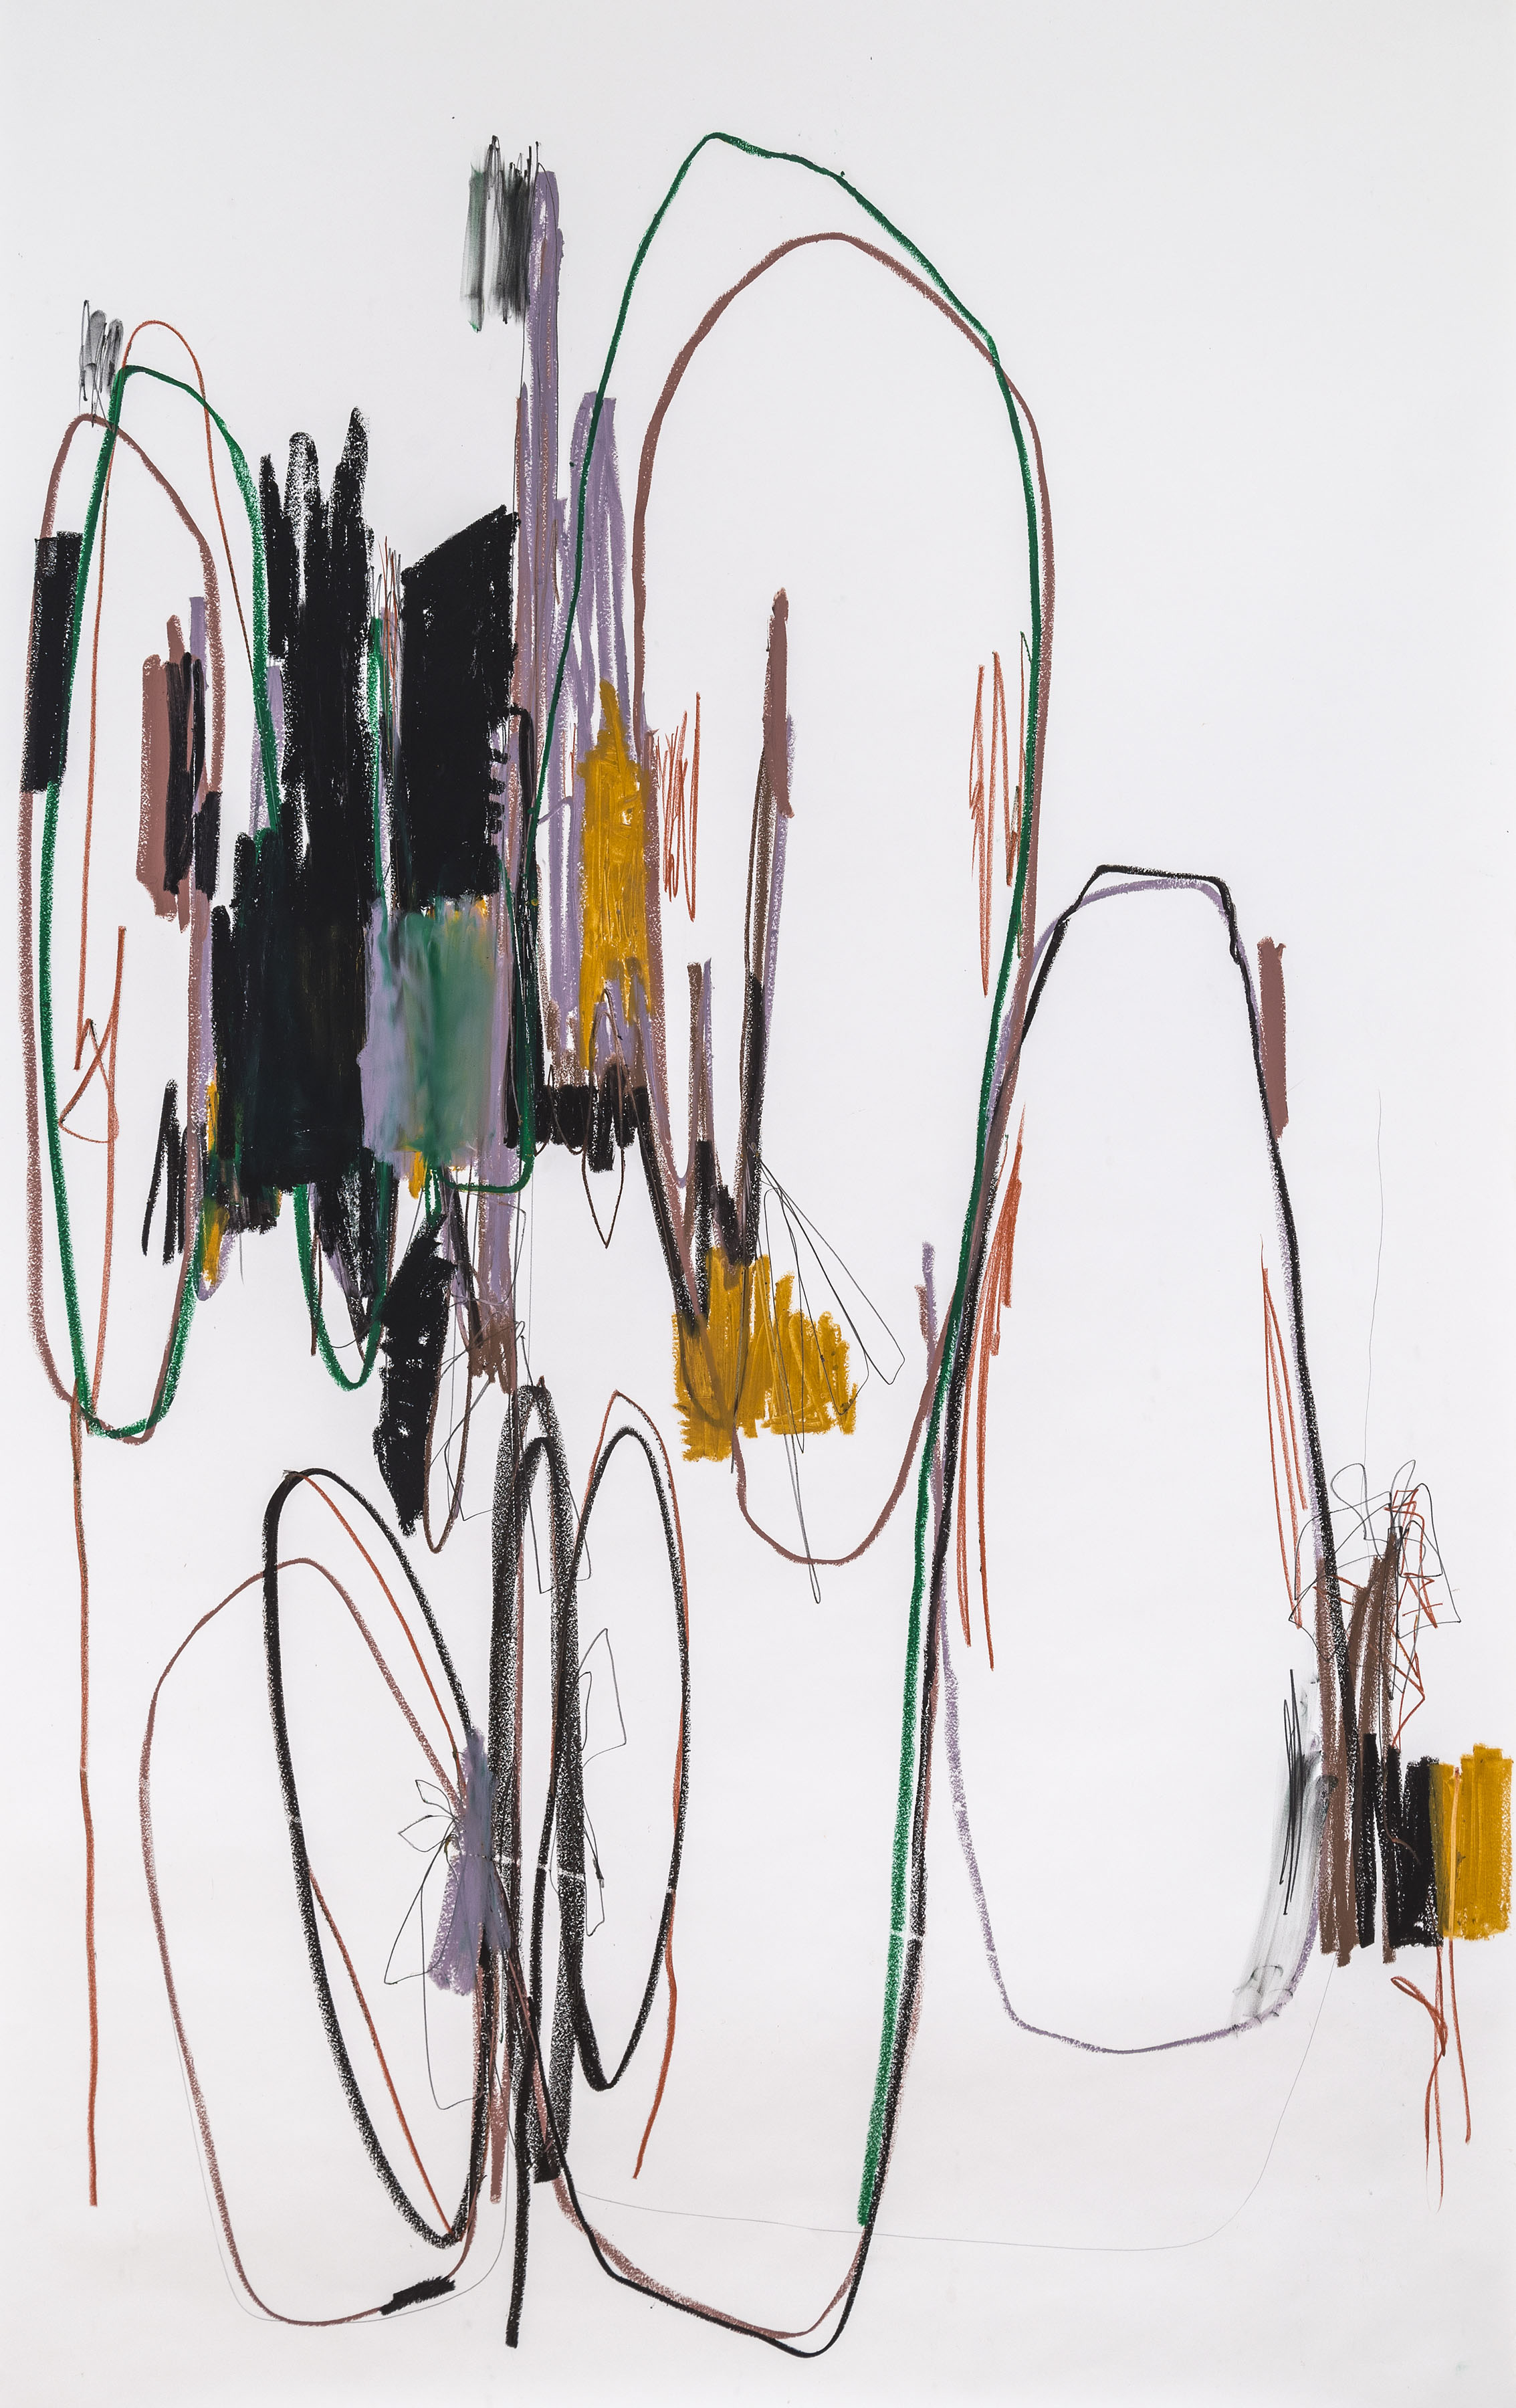   Upper West Side,  Hook &amp; Eye Project - Mary Prescott, piano, 2014, oil stick, charcoal &amp; pencil on paper, 66x38" 